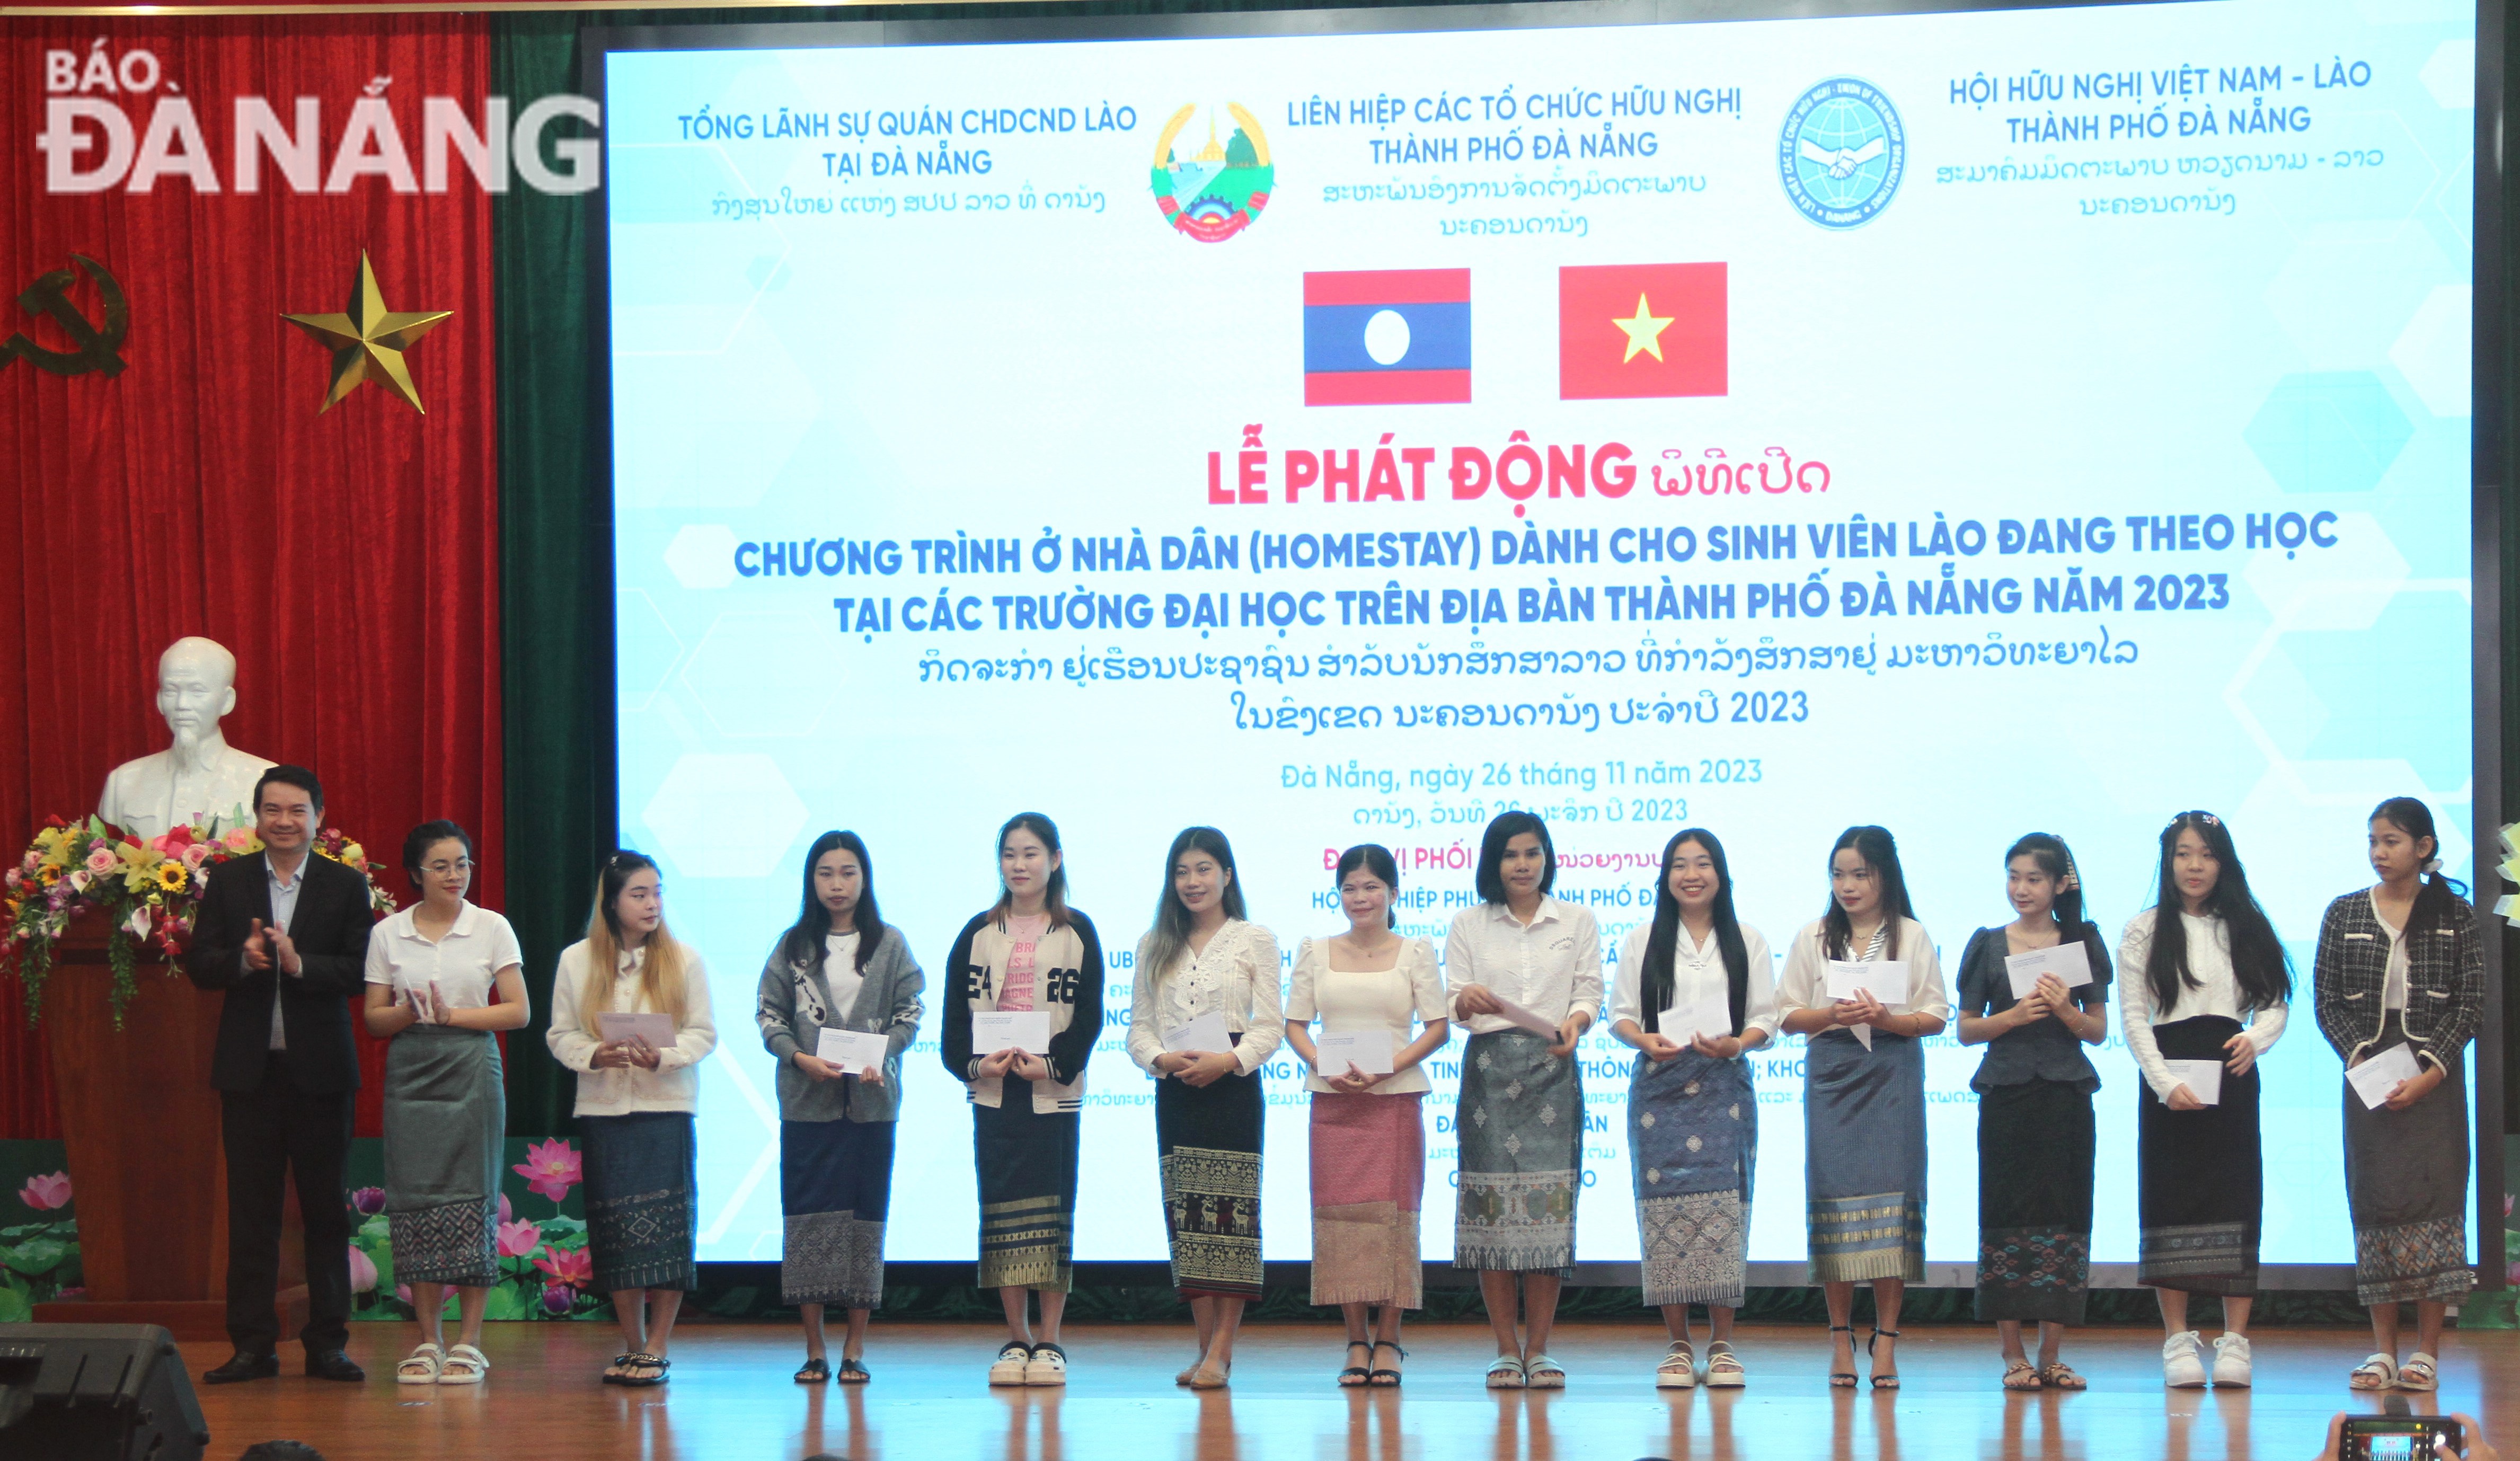 A representative of Thanh Khe District People's Committee receives and gives financial support to Lao students participating in the homestay programme. Photo: LP